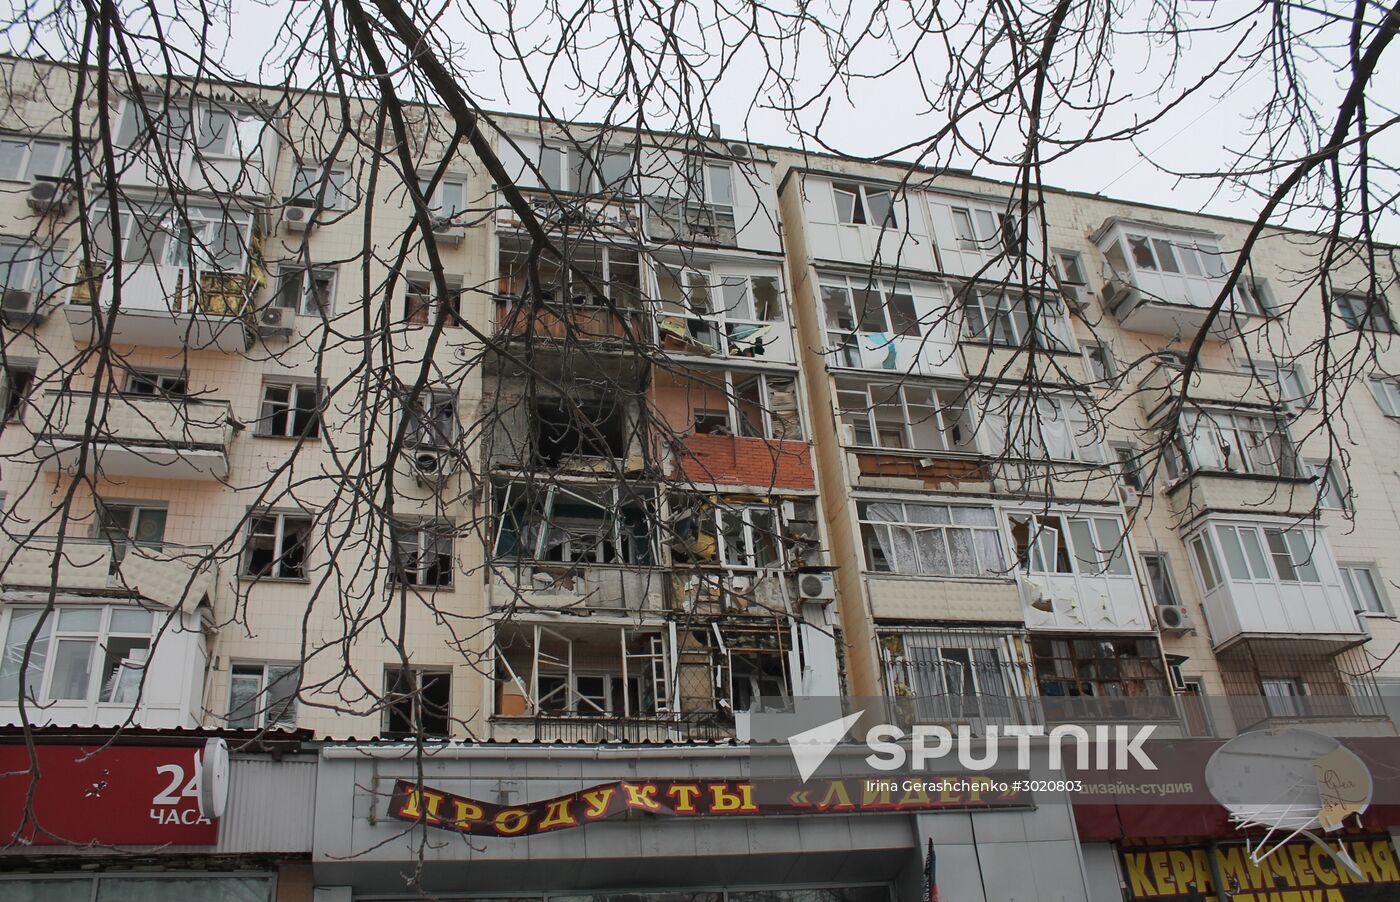 Aftermath of last night's shelling in Donetsk